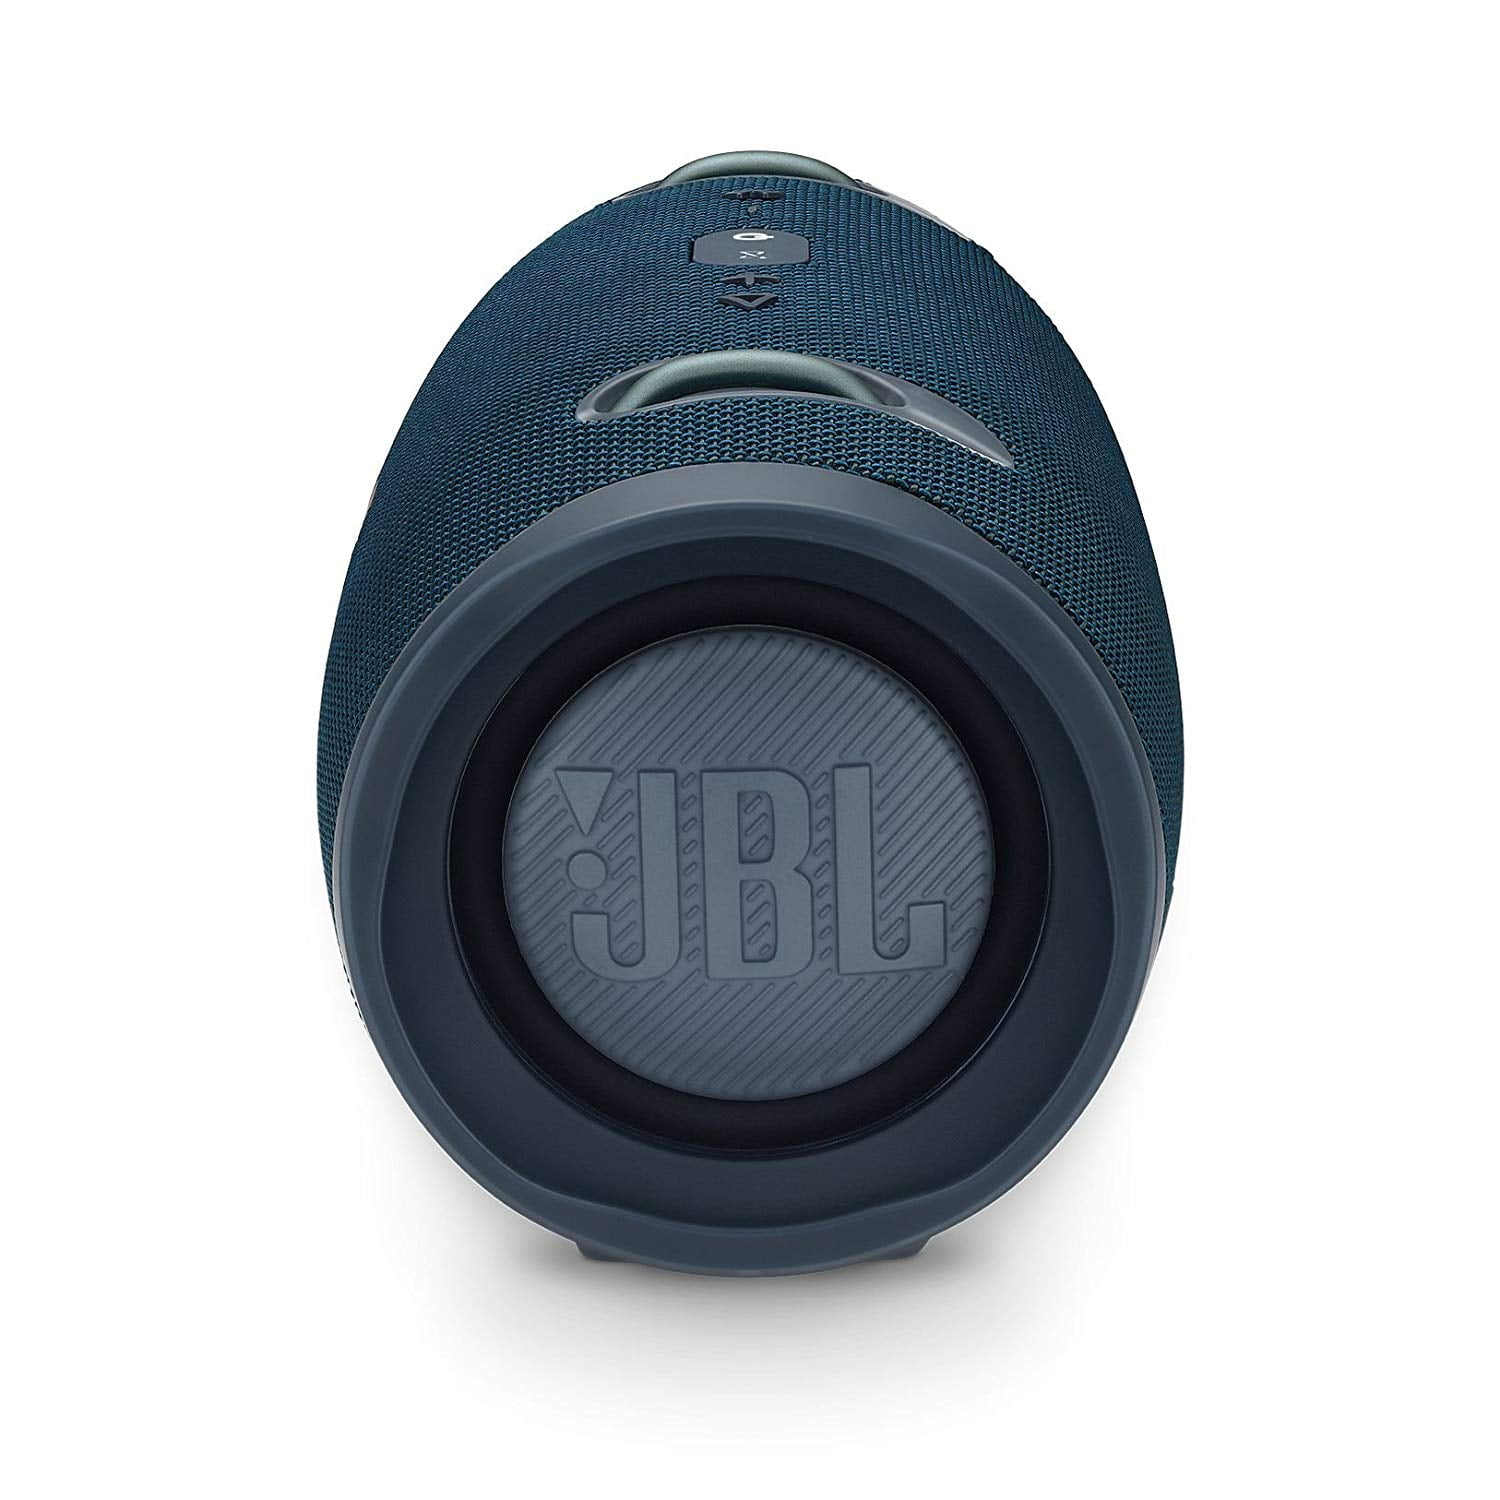 JBL Xtreme 2 review: JBL Xtreme 2 will offer bigger, better sound - CNET